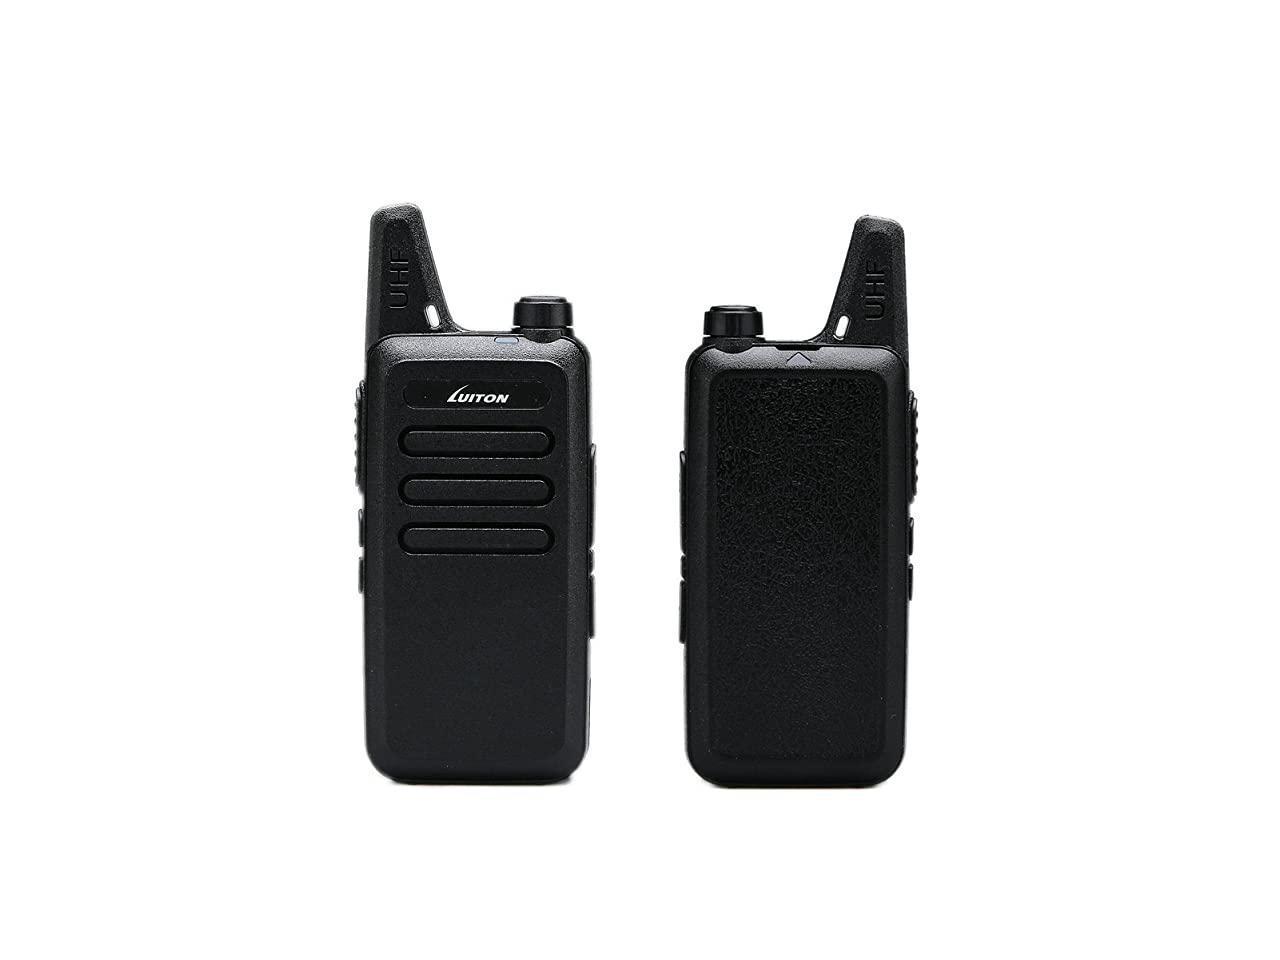 Mini Walkie Talkies with Earpiece Rechargeable 3 Watt for Camping Hiking Playing Outdoor Game by Luiton Black 2 Packs